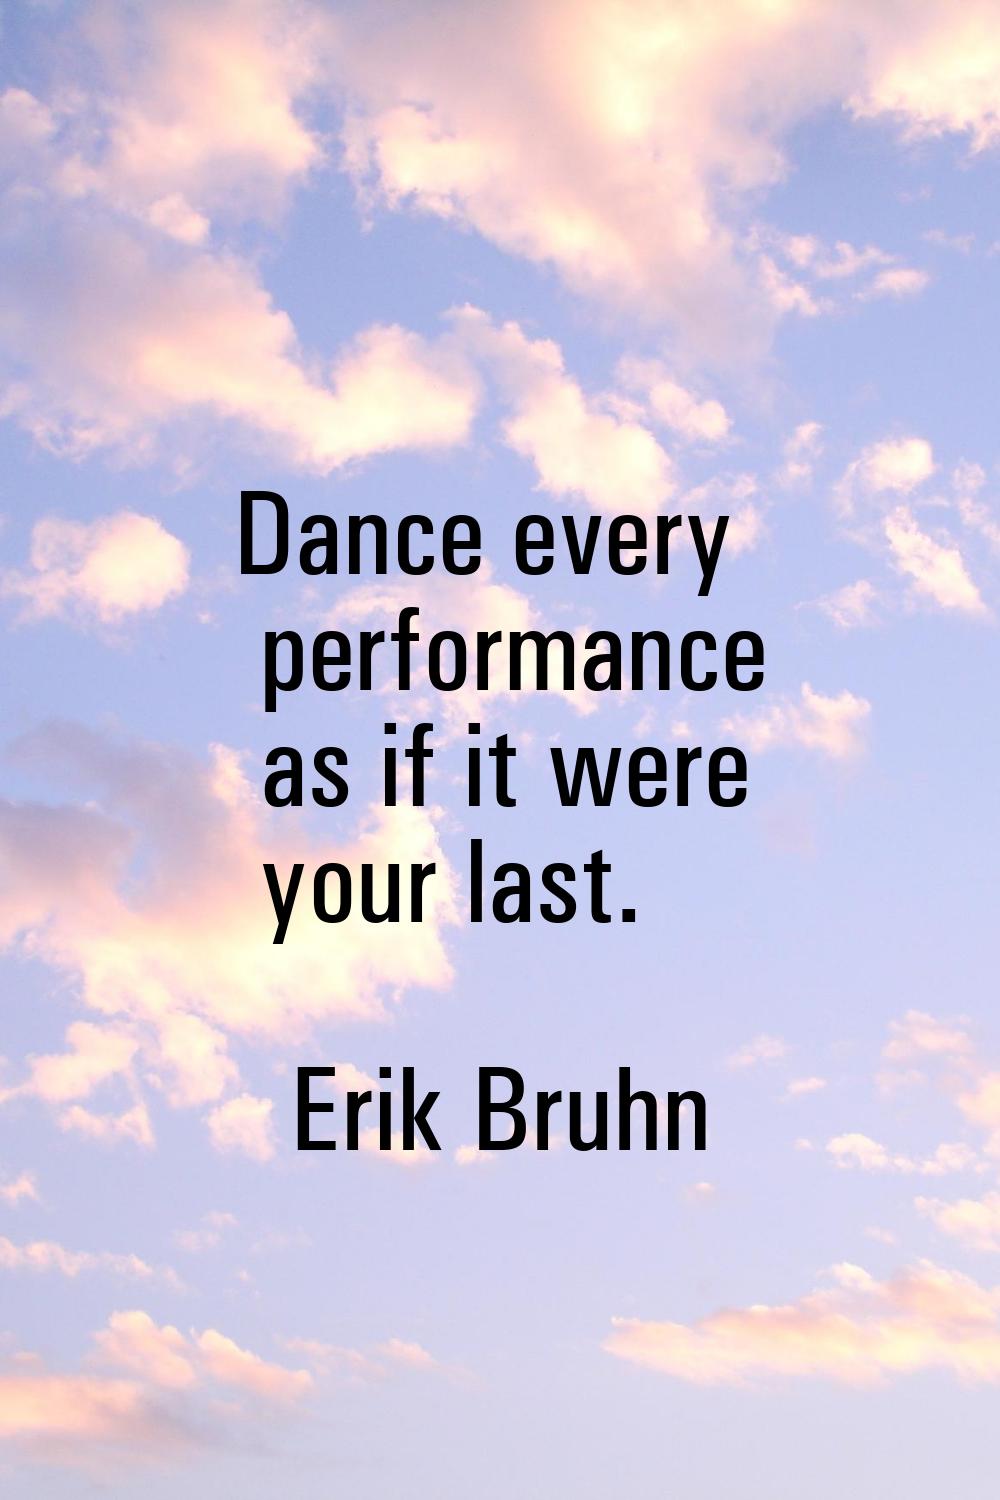 Dance every performance as if it were your last.